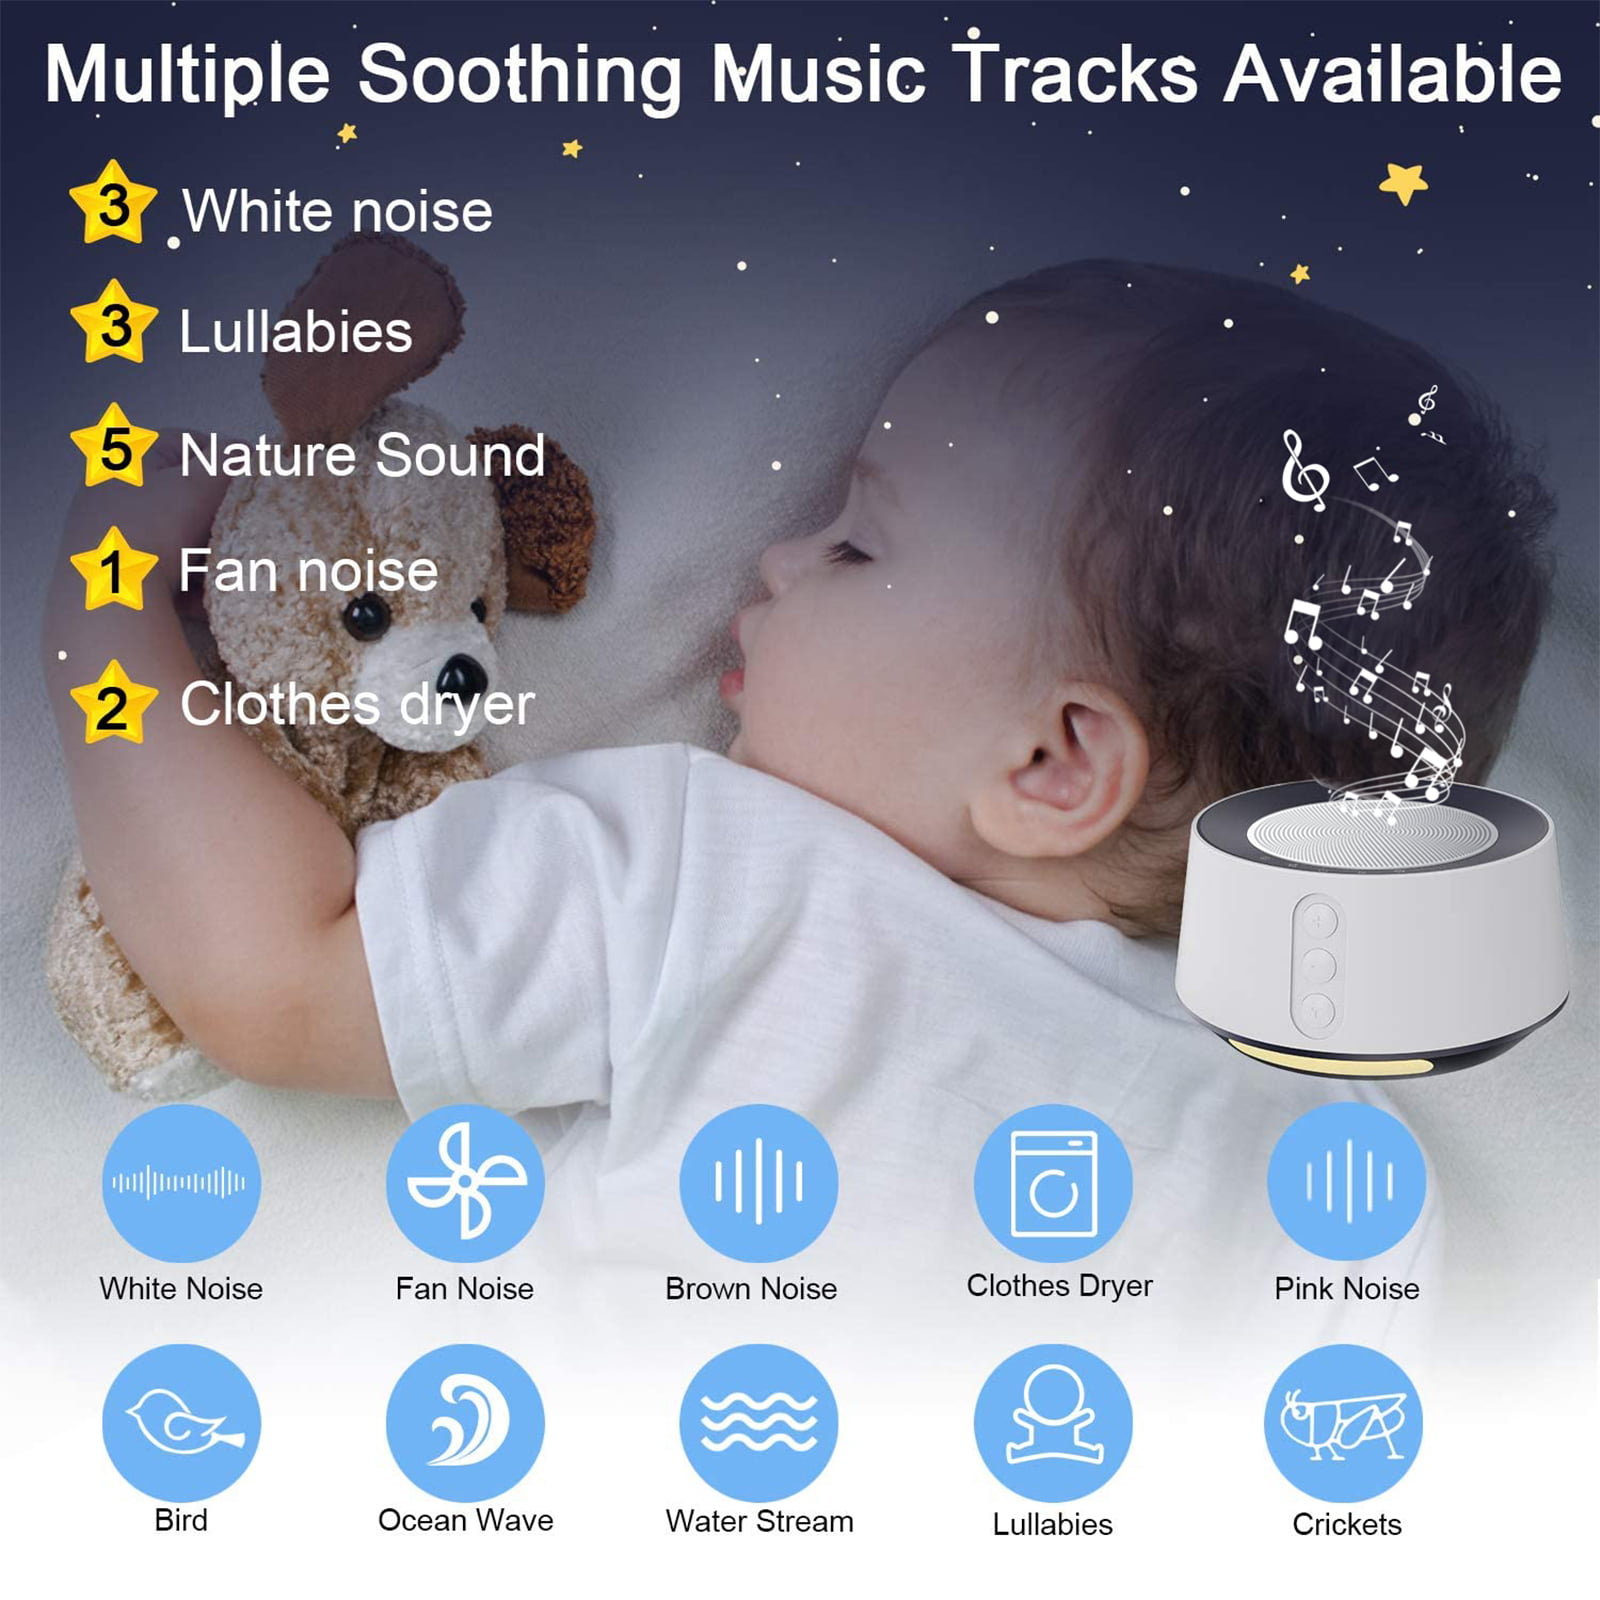 Limitless Soothing Sounds Vigorun White Noise Machine with Night Light and Bluetooth Speaker Wireless Sound Machine with 7-Color LED Light 2000mAh Rechargeable Battery for Sleeping Baby Adult 